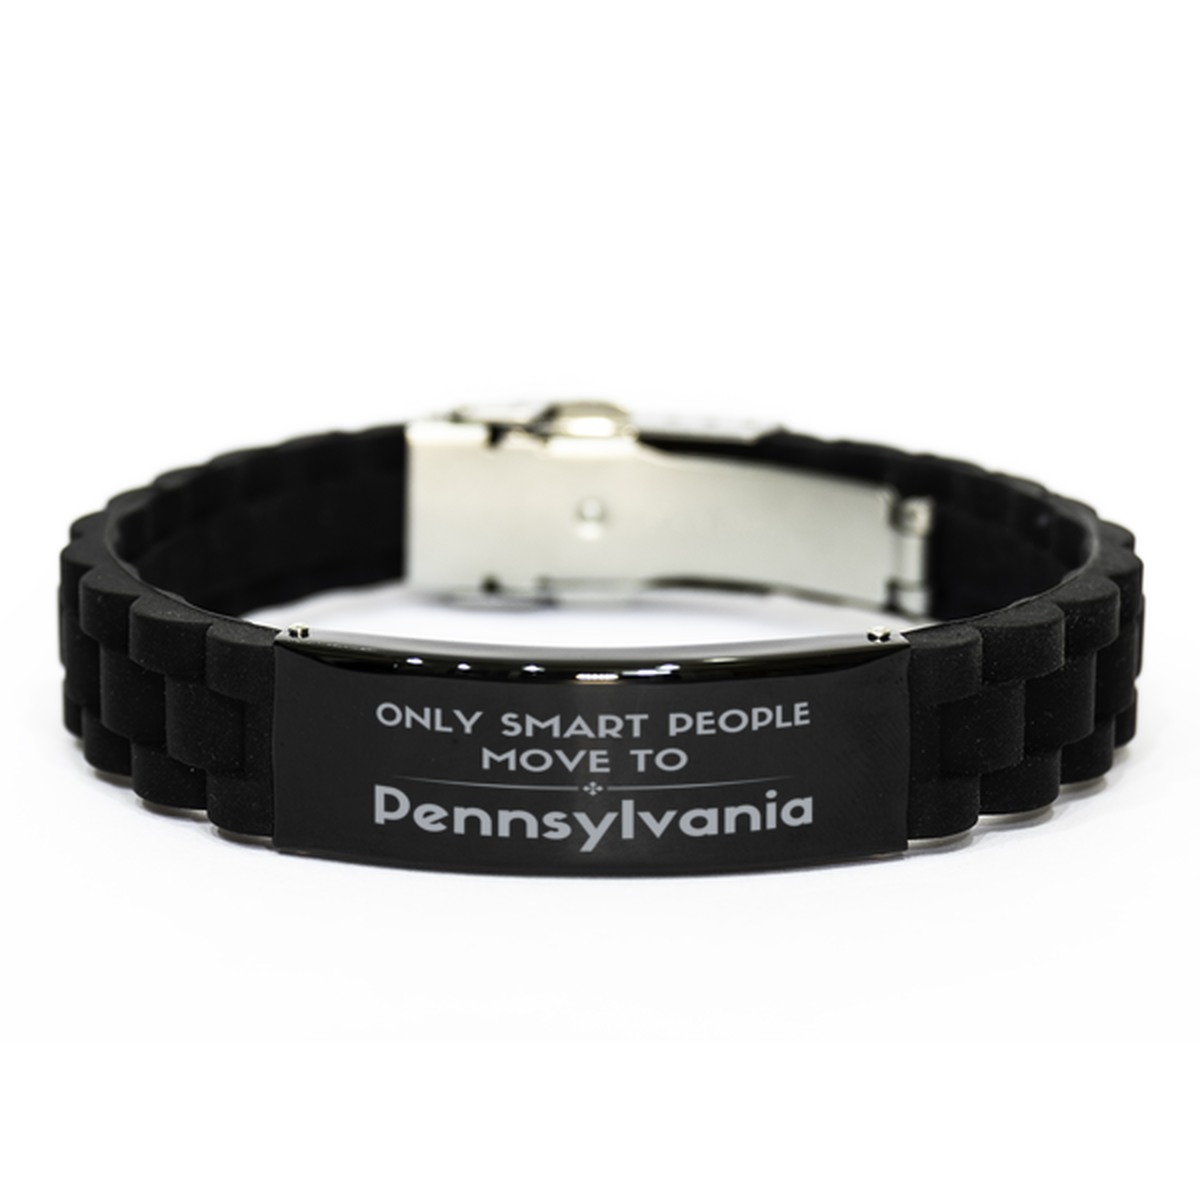 Only smart people move to Pennsylvania Black Glidelock Clasp Bracelet, Gag Gifts For Pennsylvania, Move to Pennsylvania Gifts for Friends Coworker Funny Saying Quote